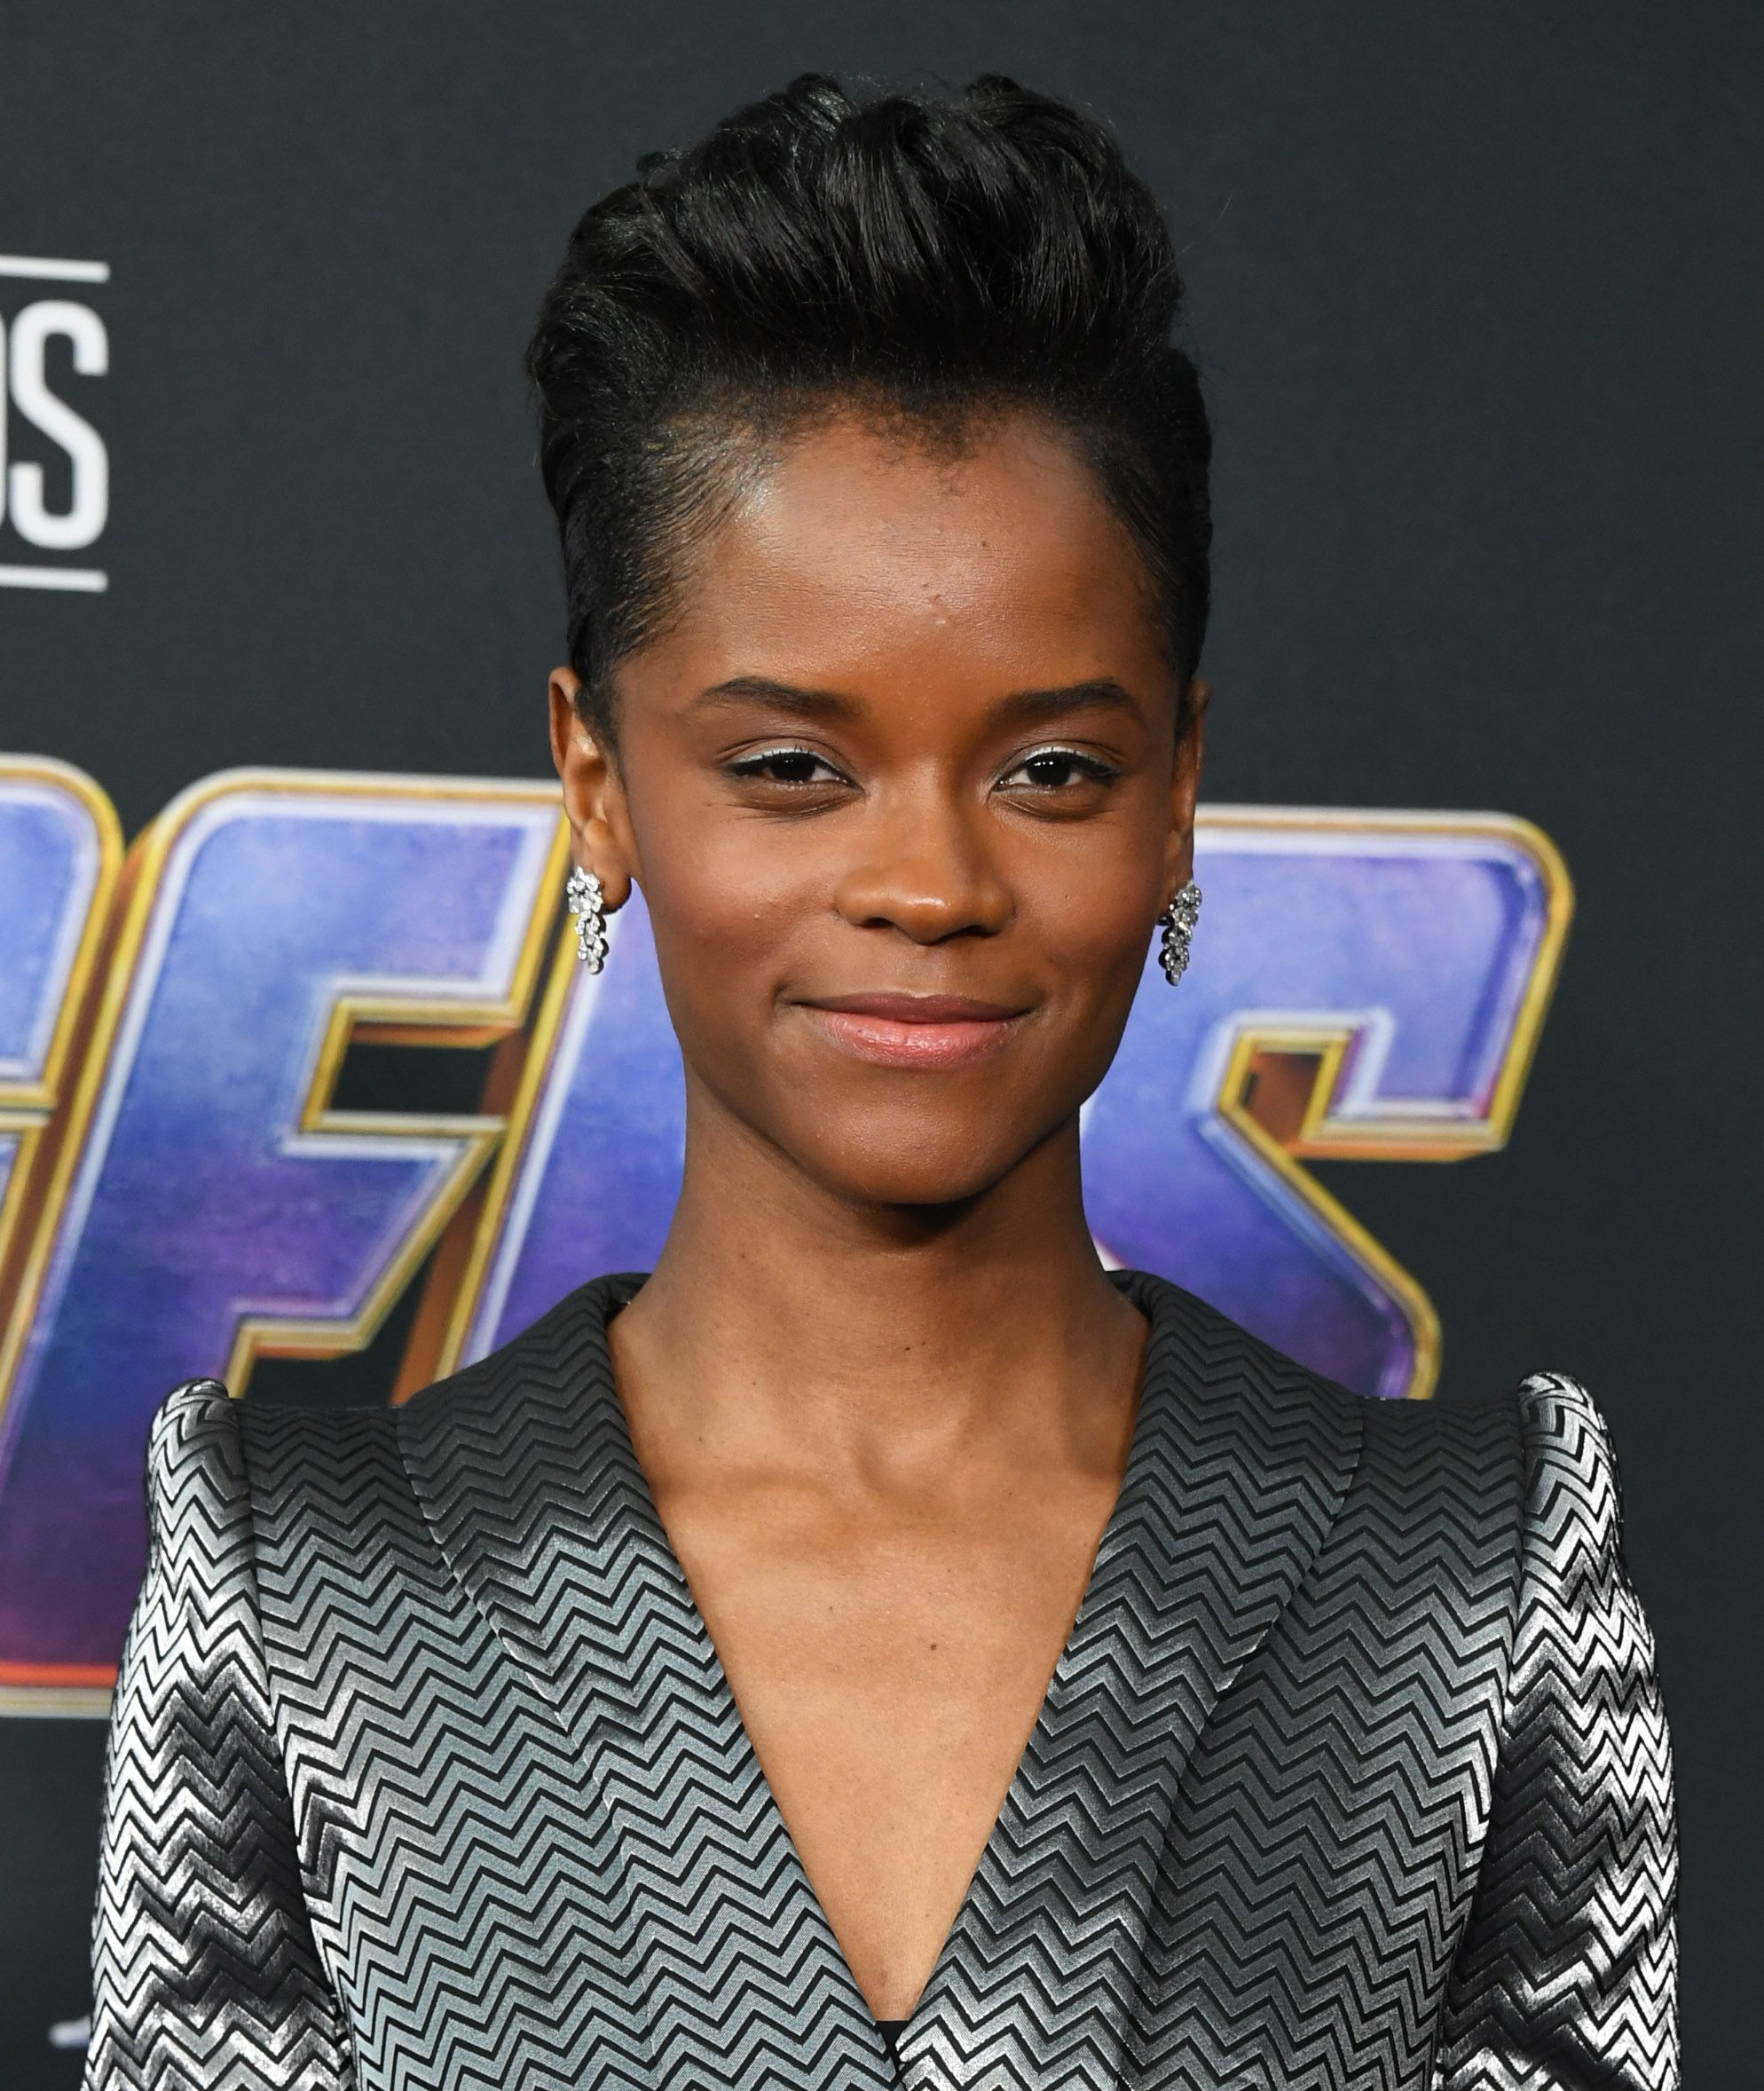 Letitia Wright at the World Premiere of  "Avengers: Endgame" at Los Angeles Convention Center on April 22, 2019 in Los Angeles, California. | Source: Getty Images